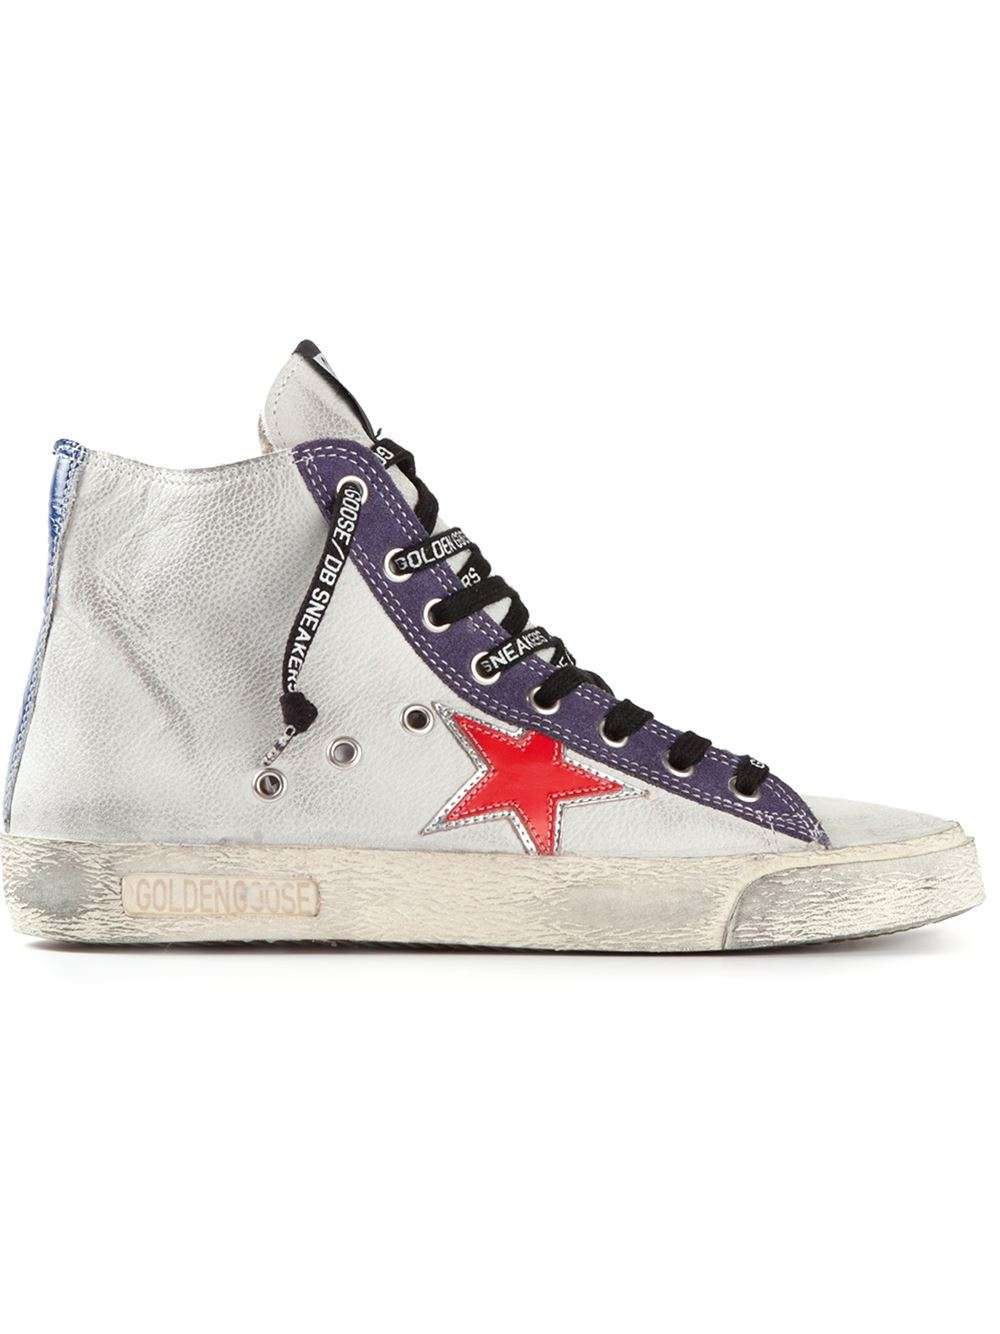 Golden goose deluxe brand High Top Lace Up Sneakers in ...